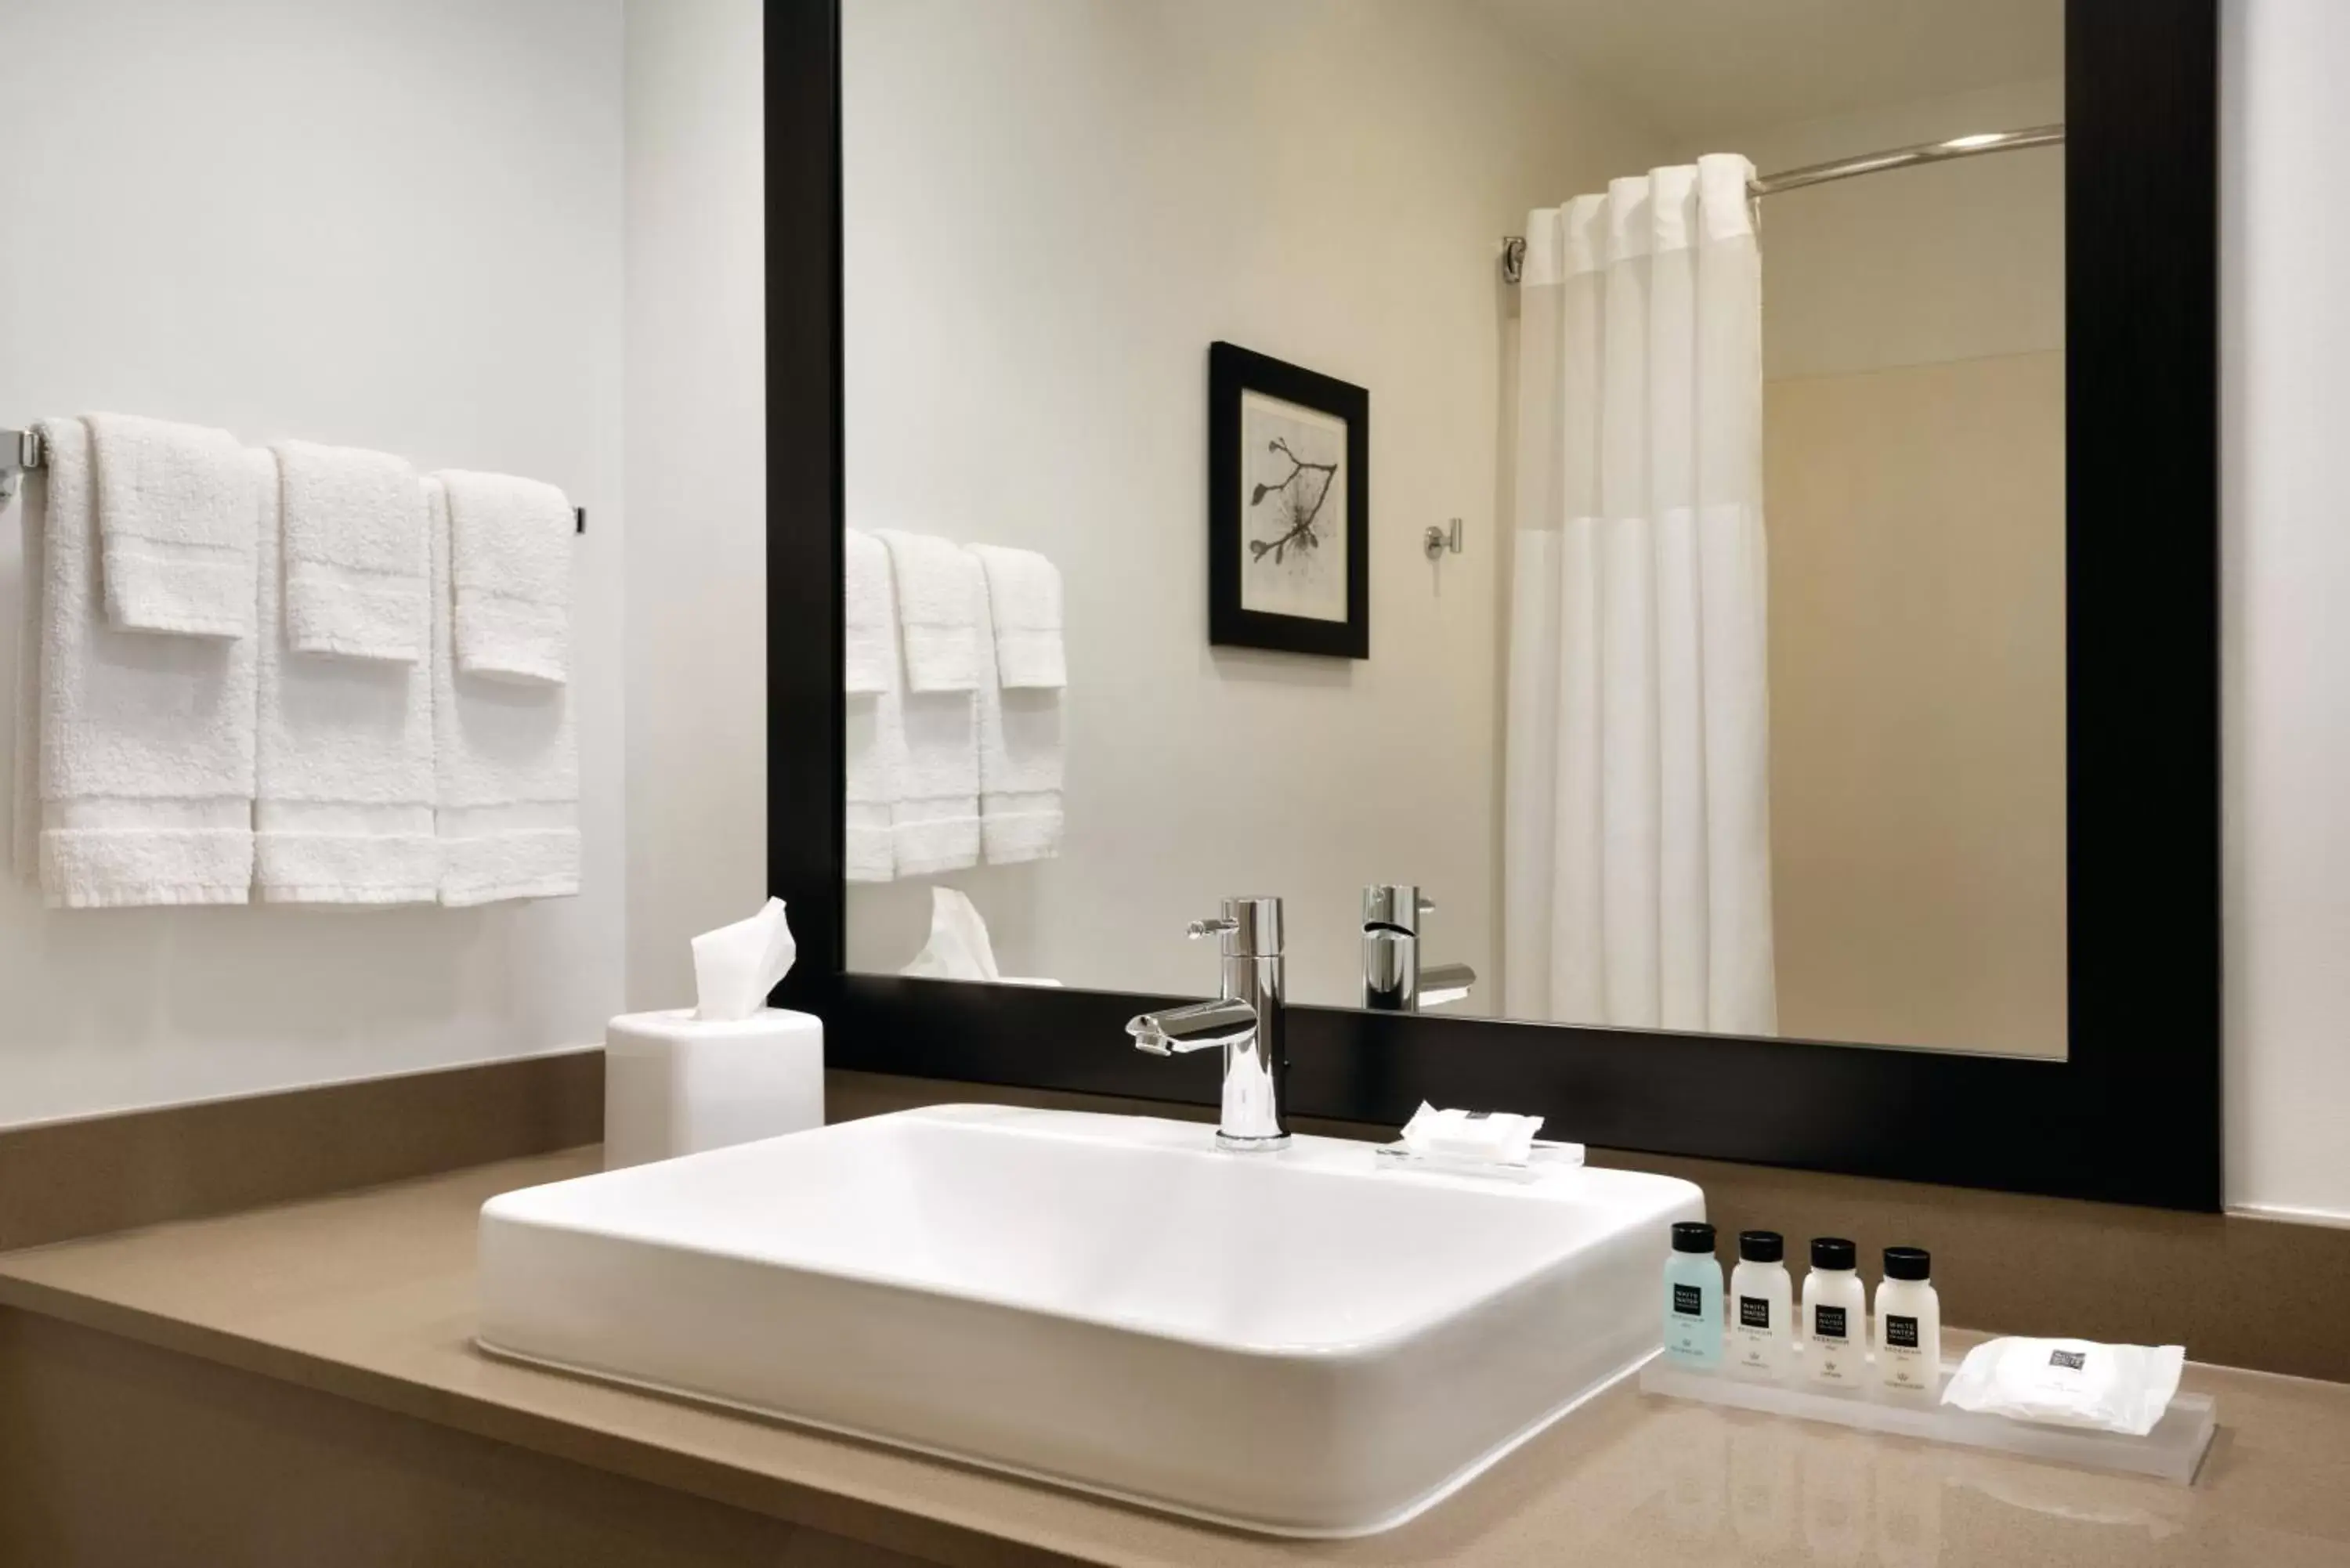 Bathroom in Country Inn & Suites by Radisson, Des Moines West, IA